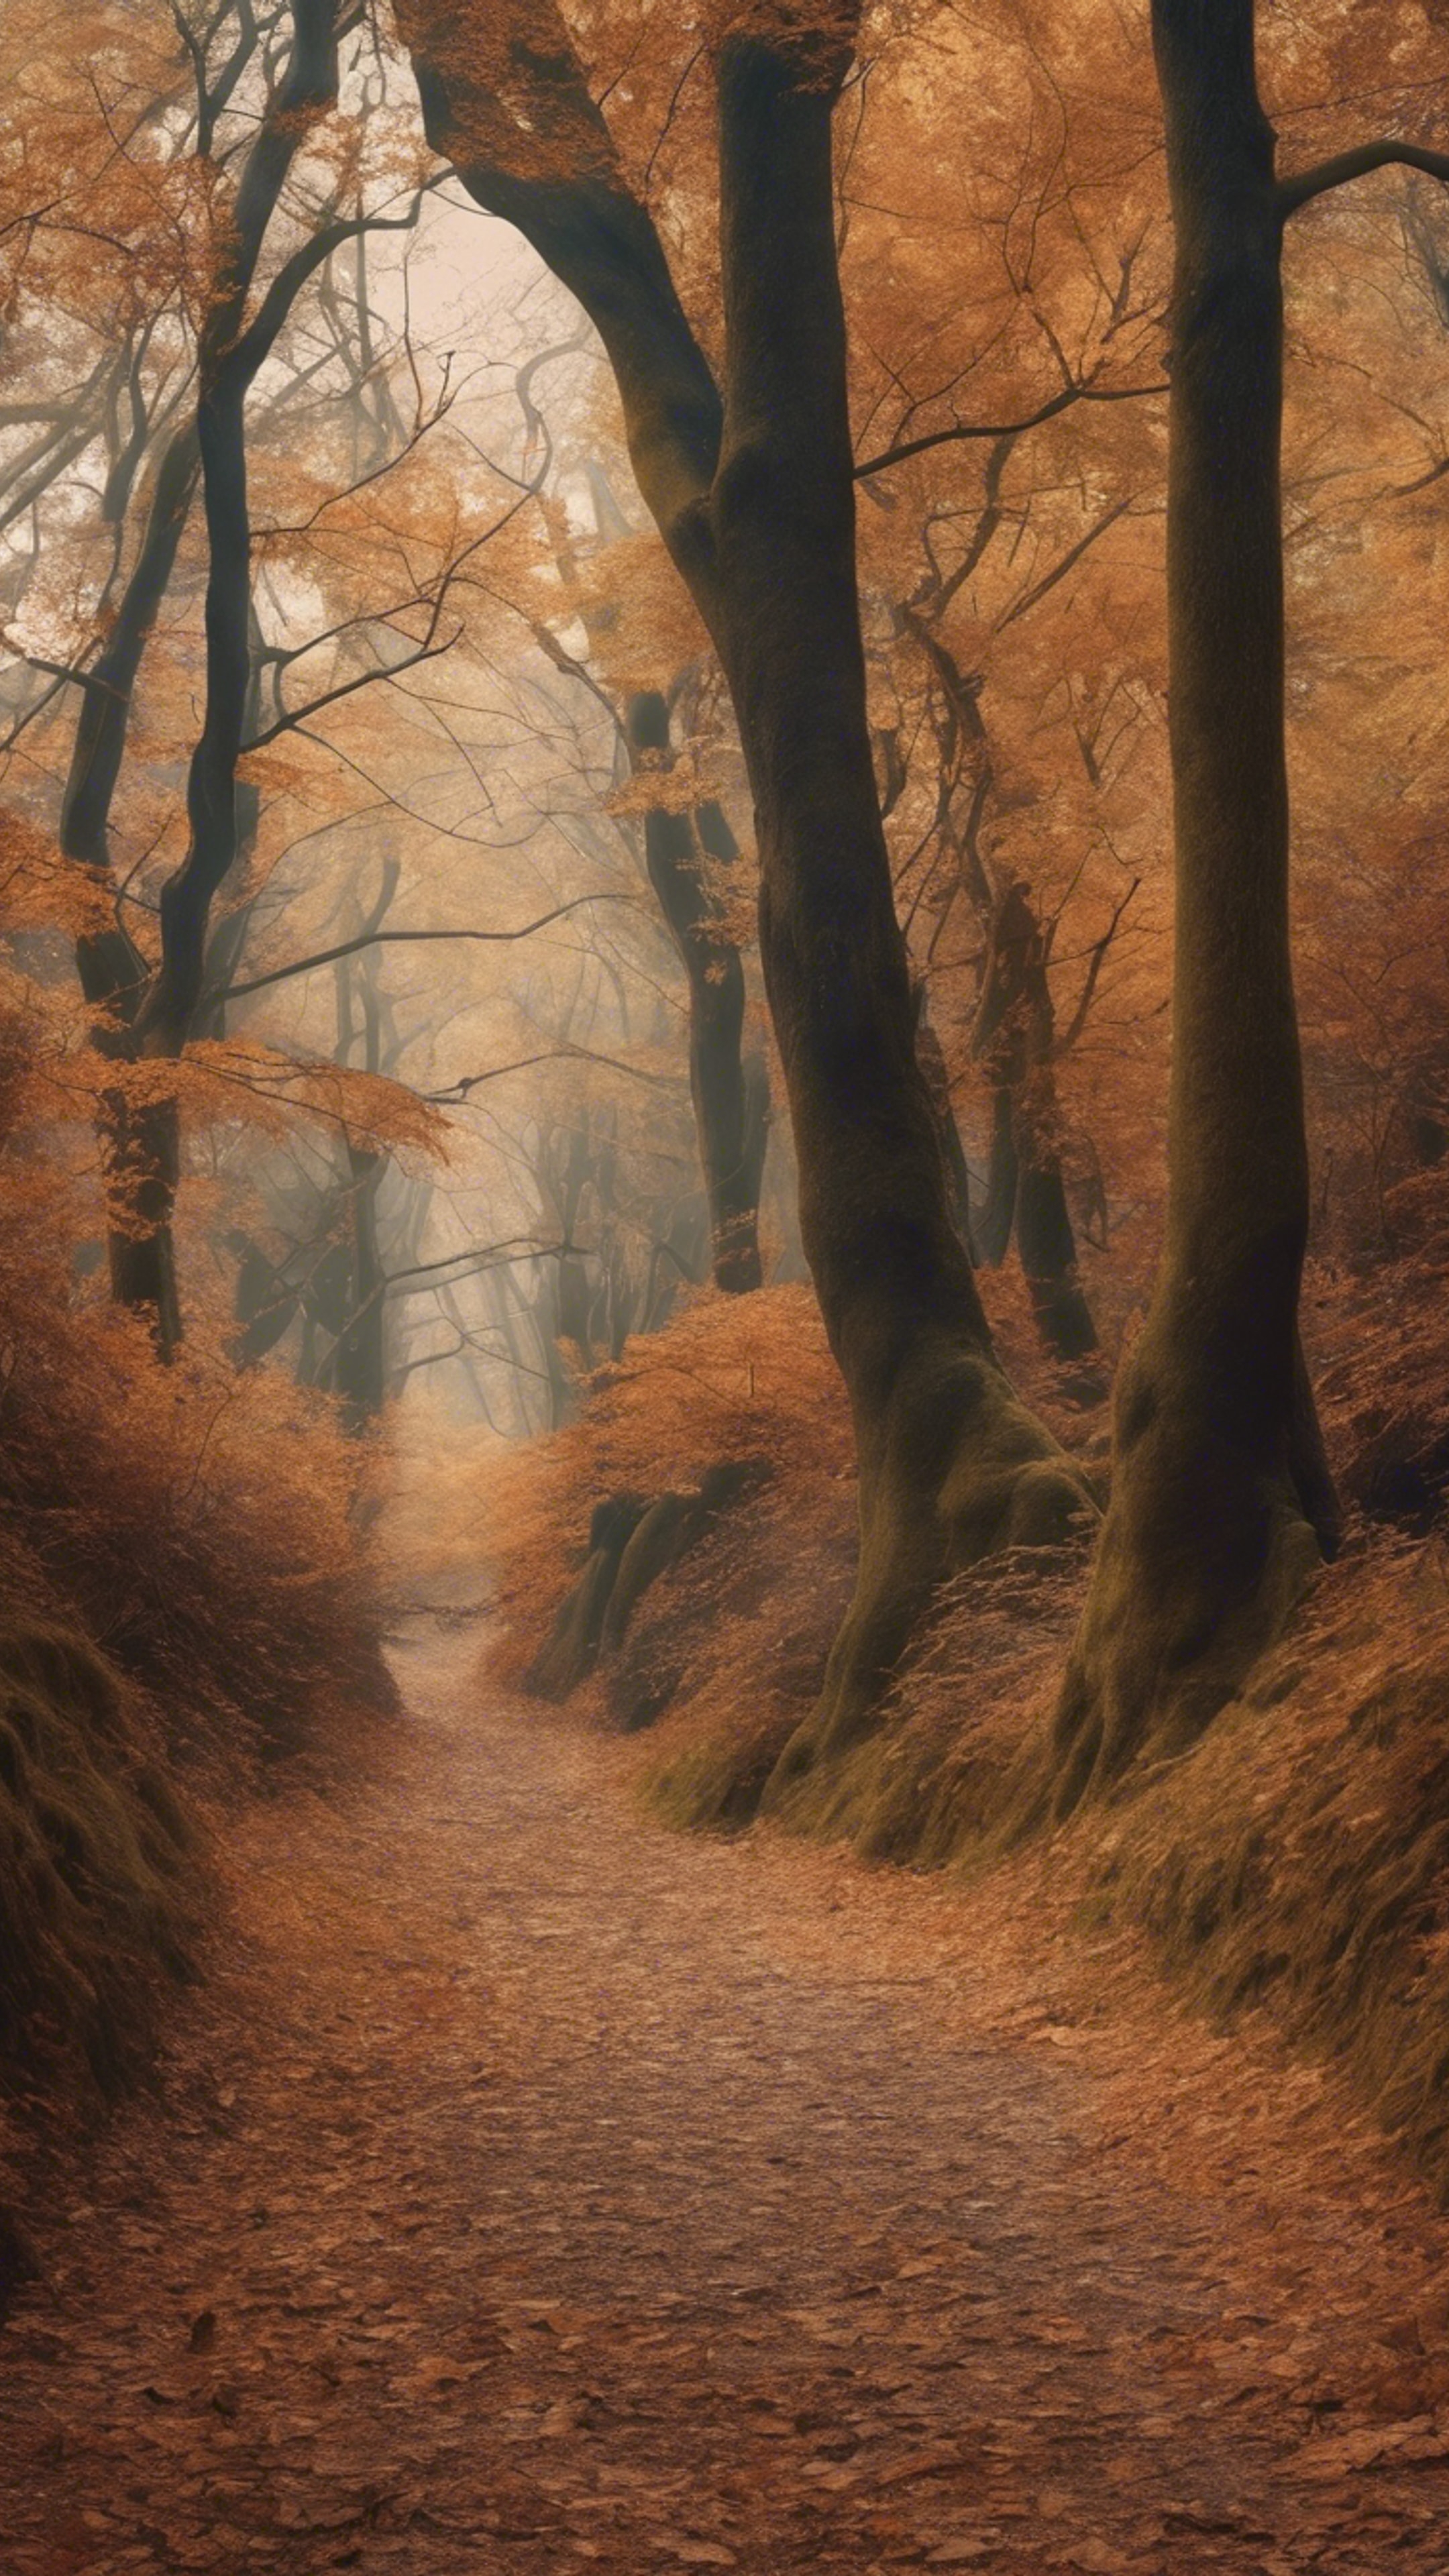 A mystic forest path covered in crunchy brown autumn leaves 벽지[44e03b30ee0343628942]